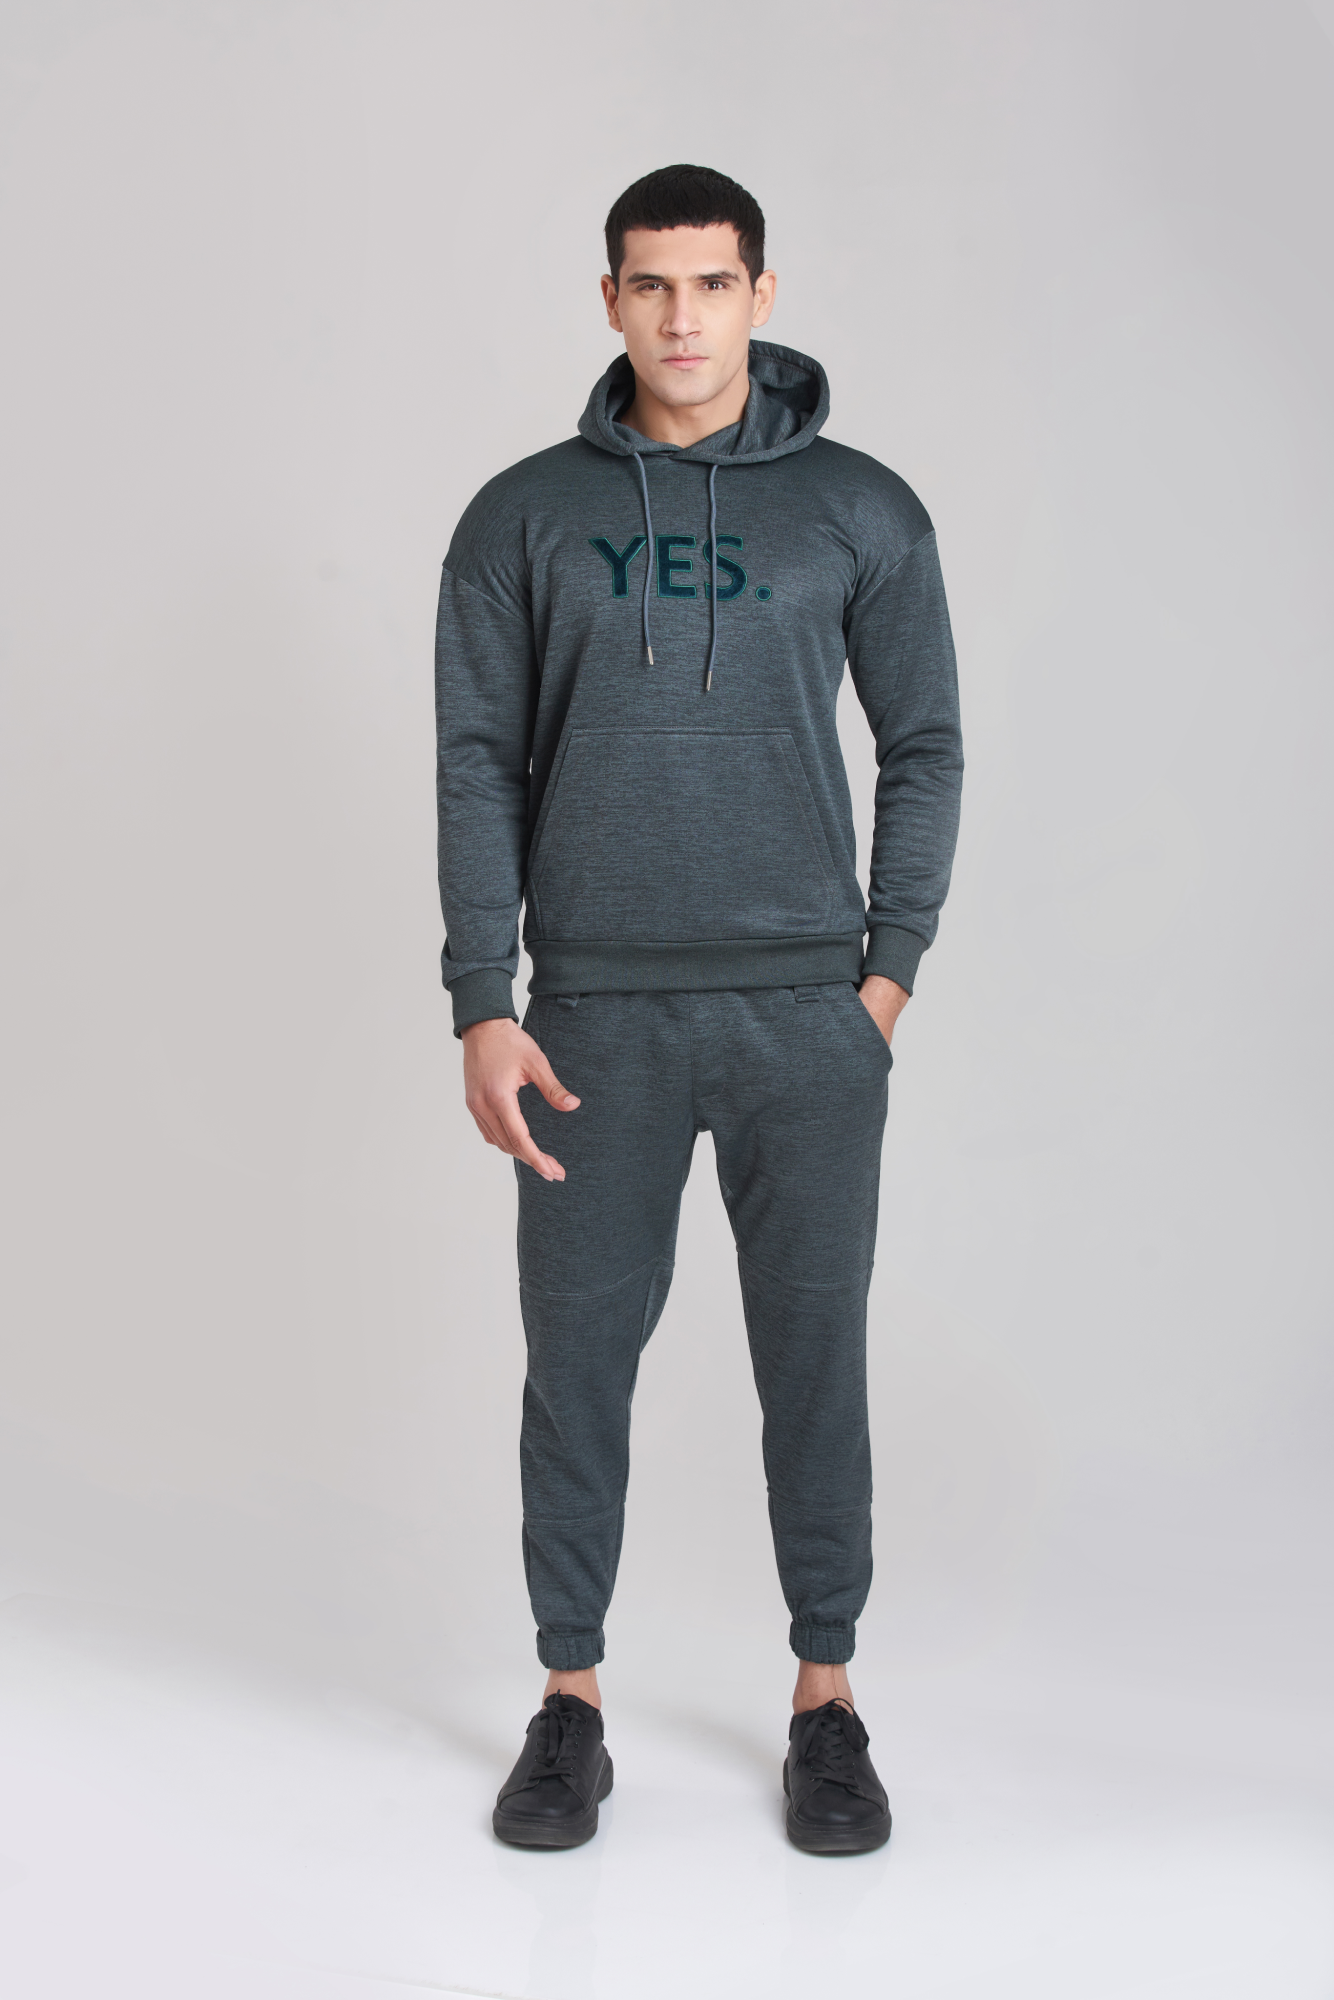 Braves-Vibes Charcoal Hoody Tracksuit - Men